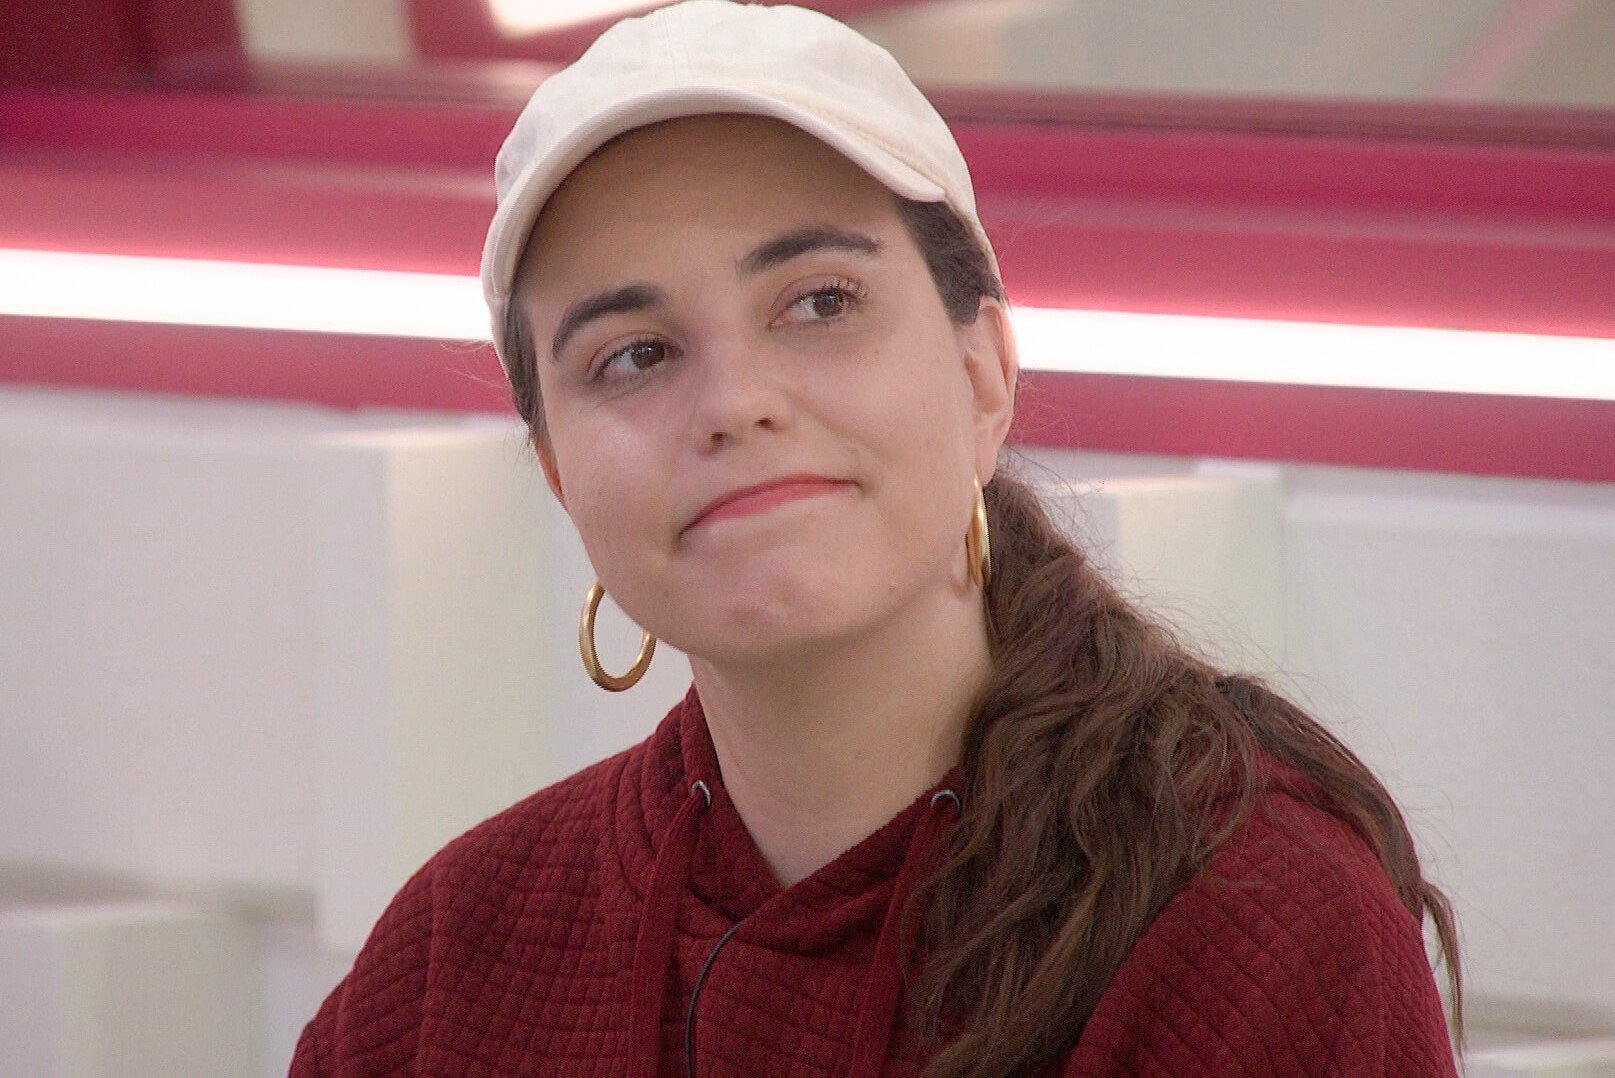 Brittany Hoopes, who won the 'Big Brother 24' Power of Veto during week 10, wears a maroon hoodie and white baseball cap.